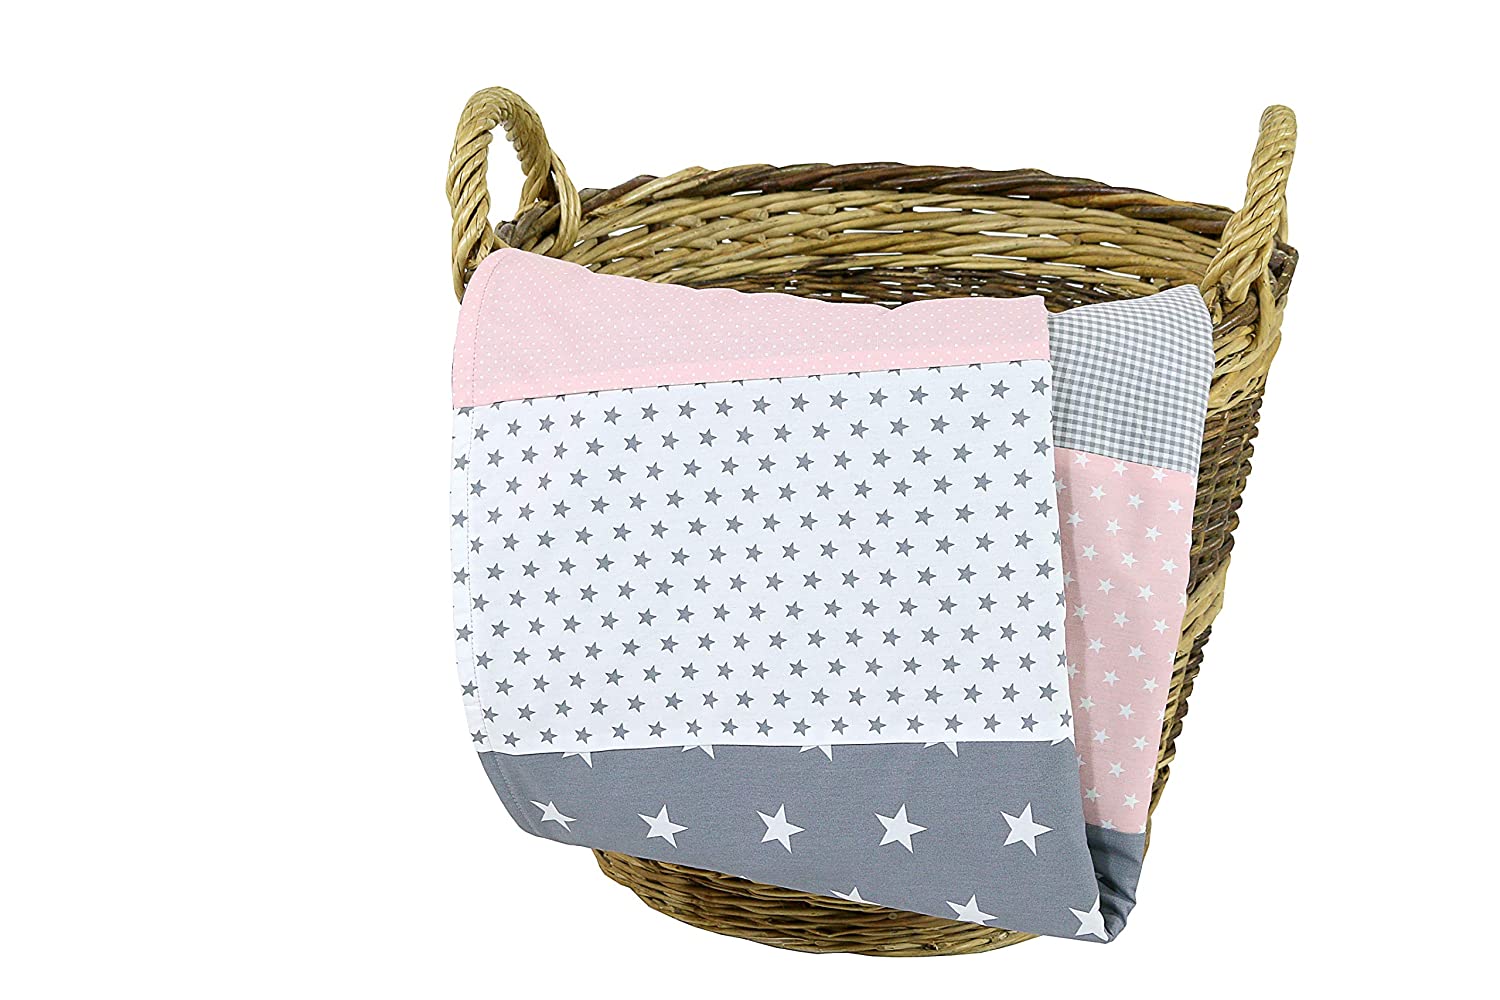 ULLENBOOM® Baby Blanket made of ÖkoTex Cotton and Fleece, Ideal as a Pram Blanket or Play Blanket, 70 x 100 cm & 100 x 140 cm and Made in the EU, Design: Stars, Dots, Patchwork 70 x 100 cm Pink Grey